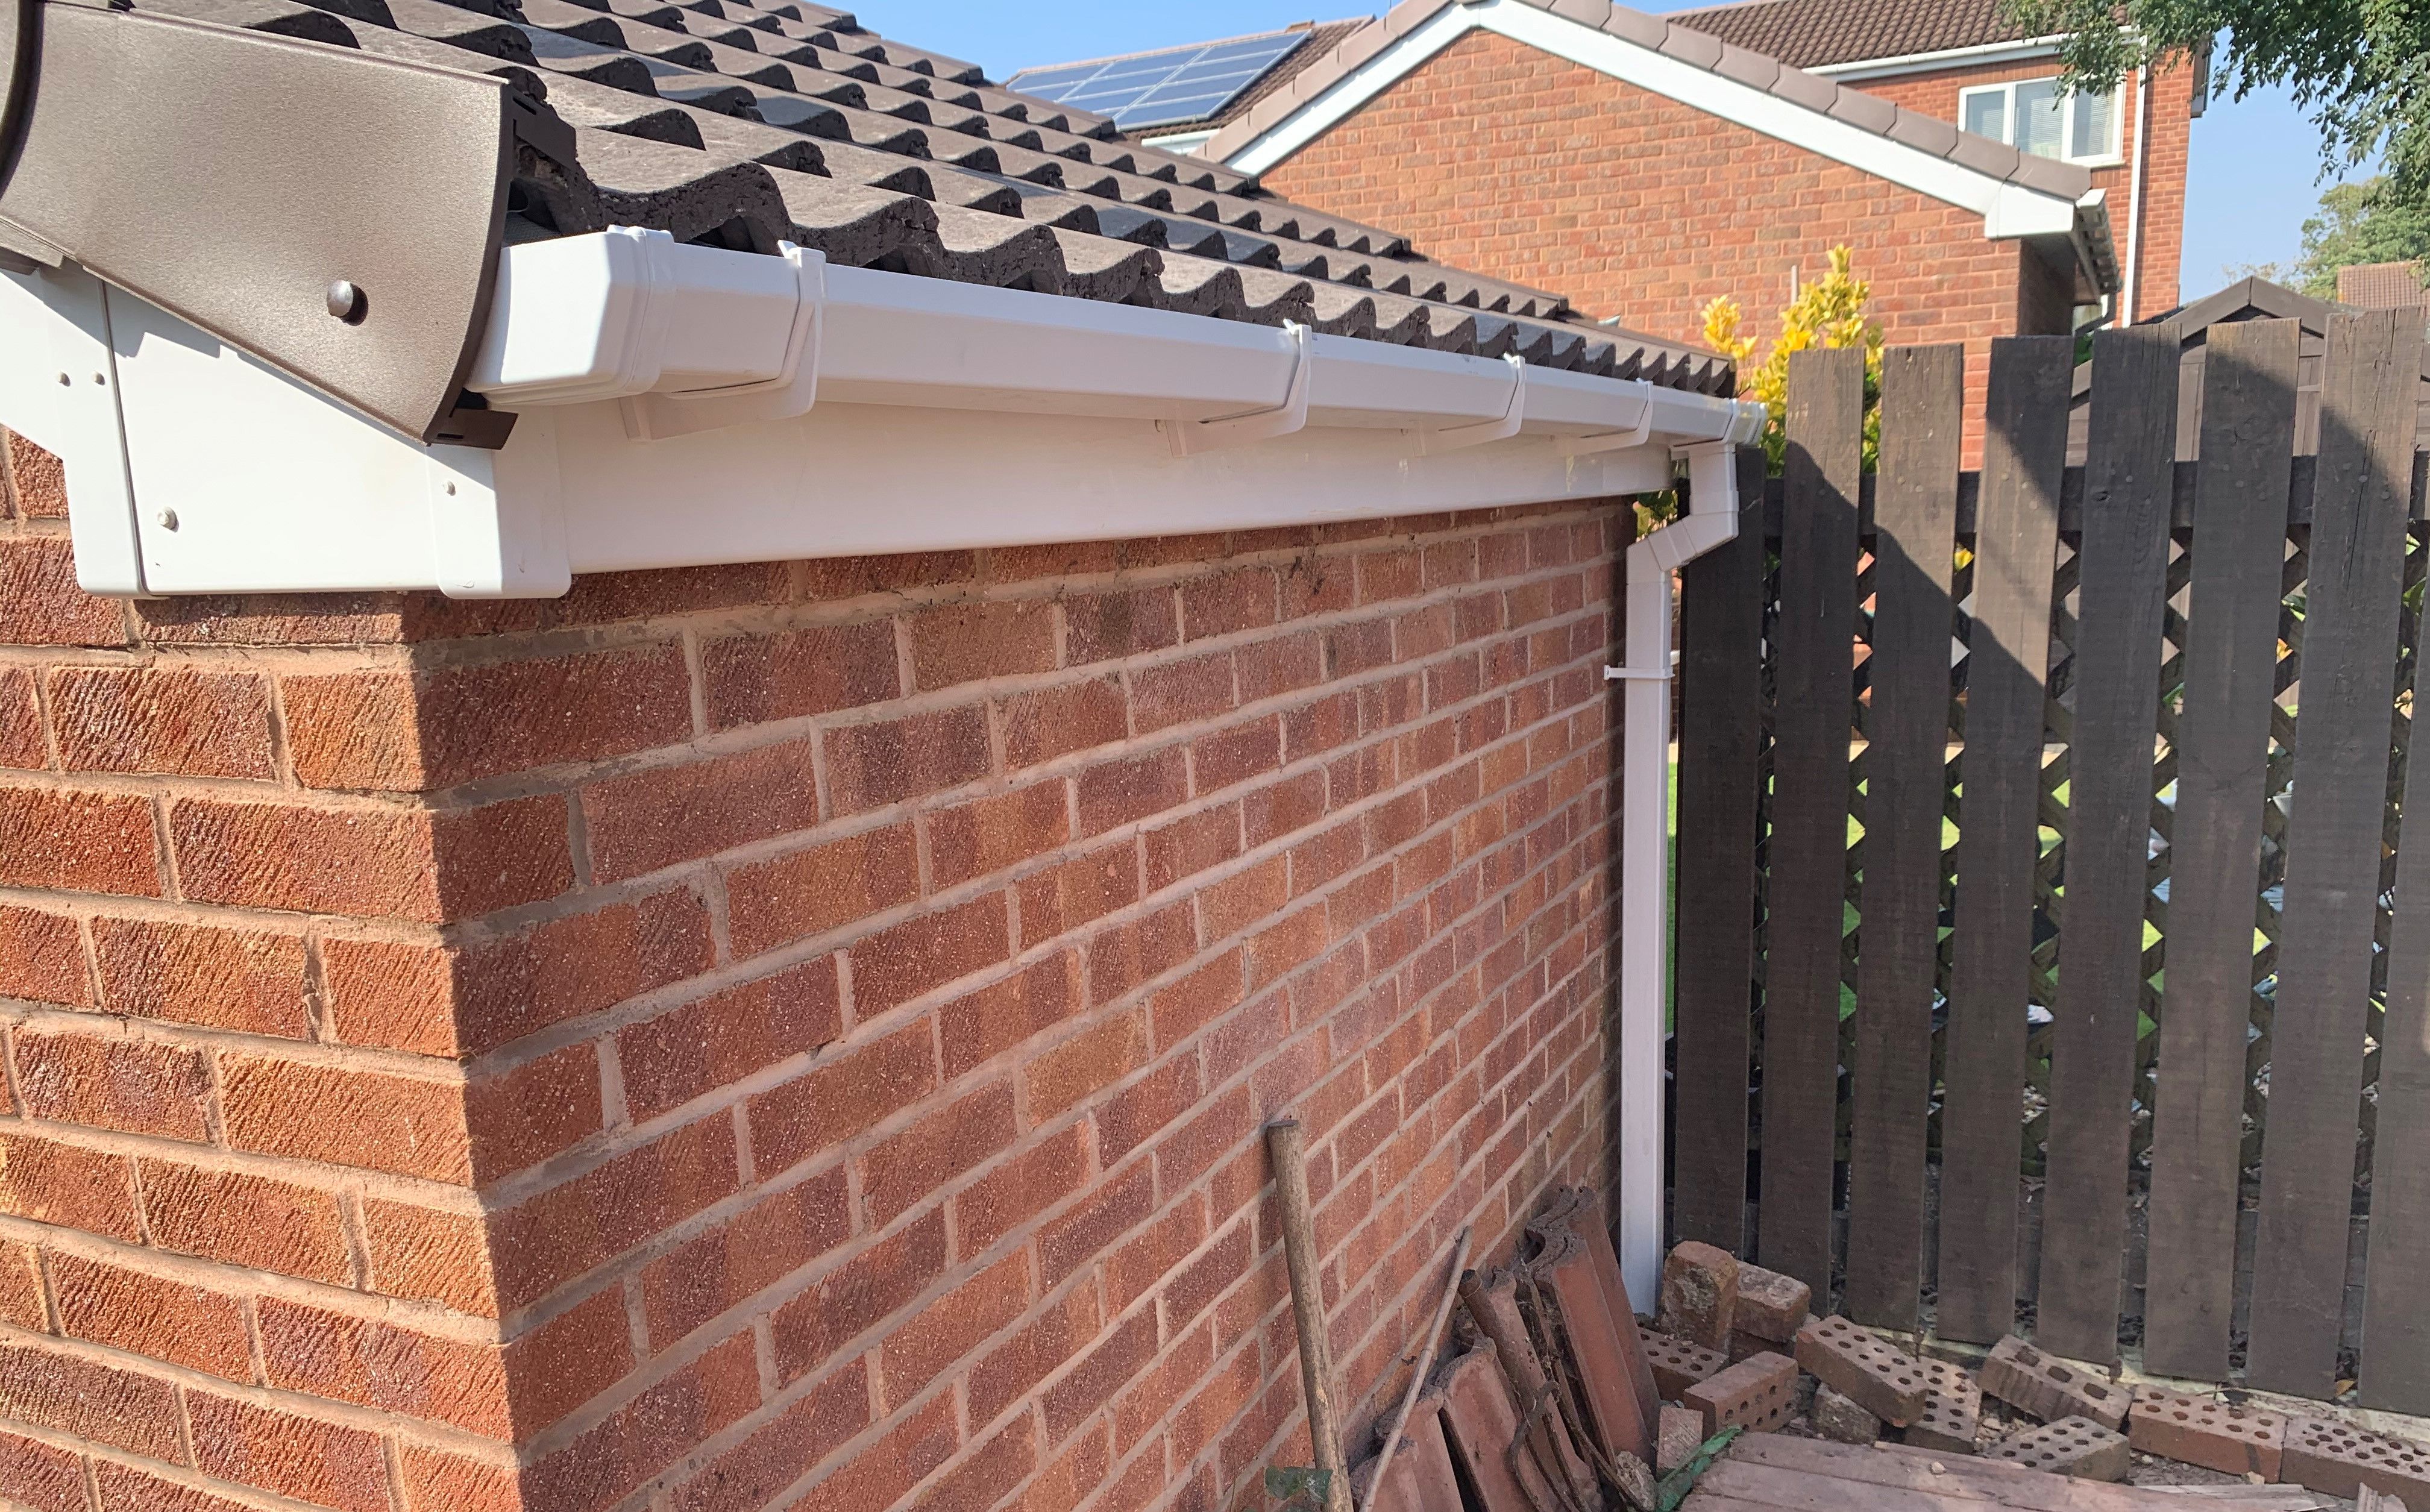 fascia and guttering